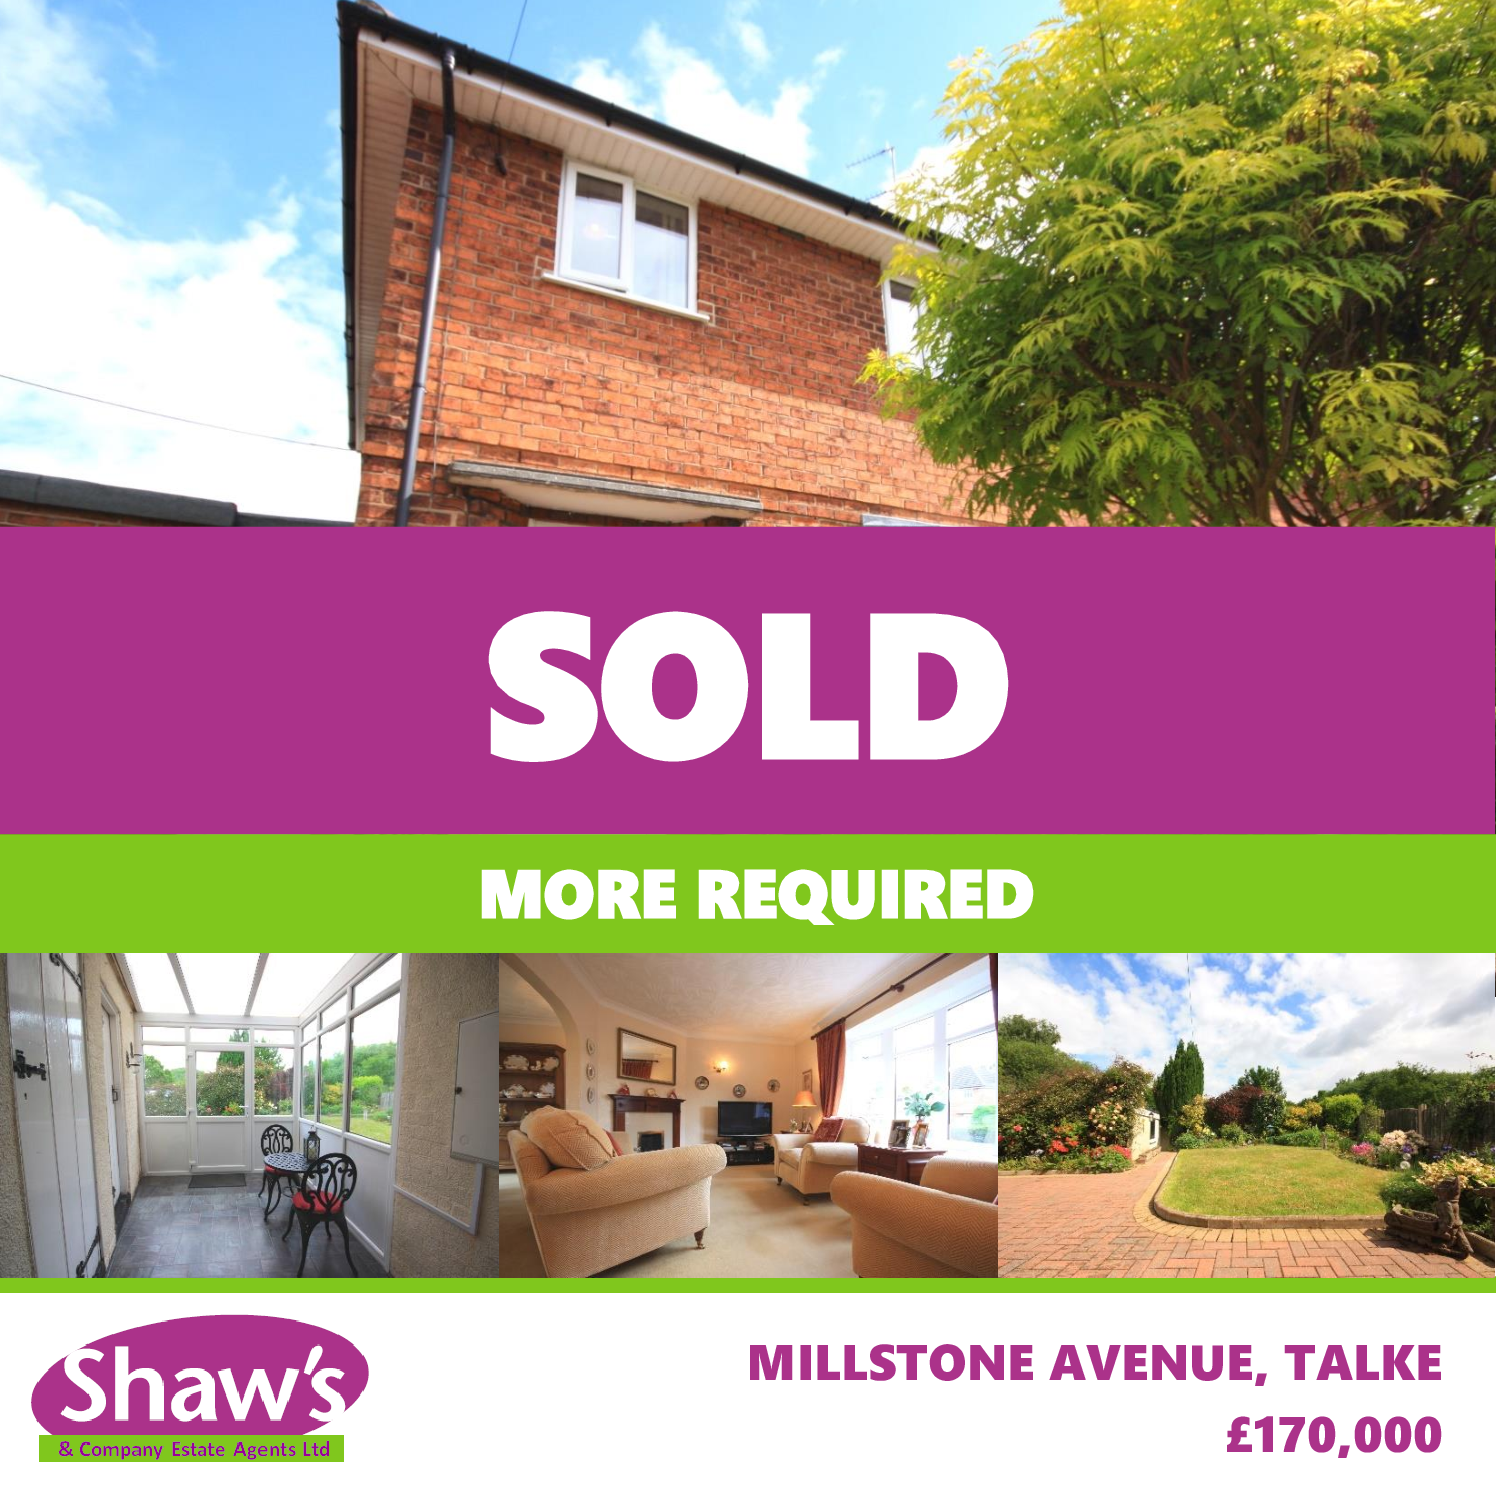 GET SOLD WITH SHAW'S!